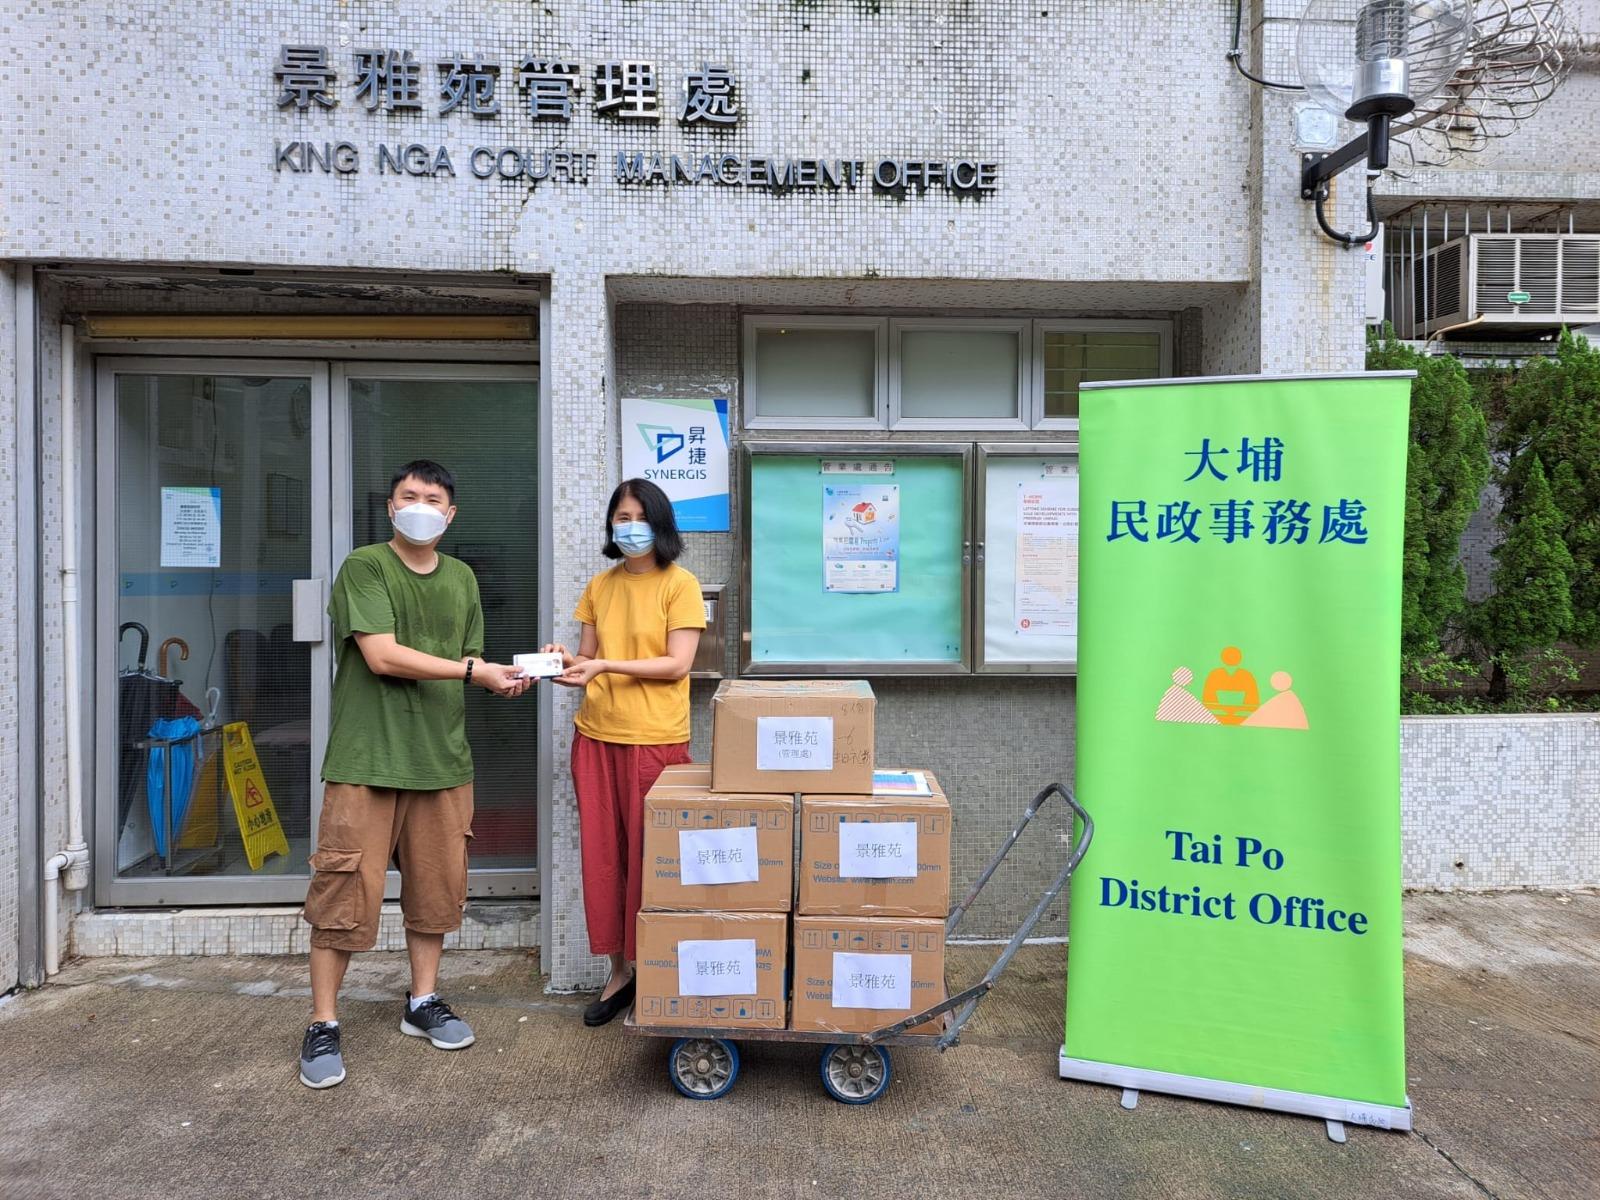 The Tai Po District Office today (June 11) distributed COVID-19 rapid test kits to households, cleansing workers and property management staff living and working in King Nga Court for voluntary testing through the property management company.
